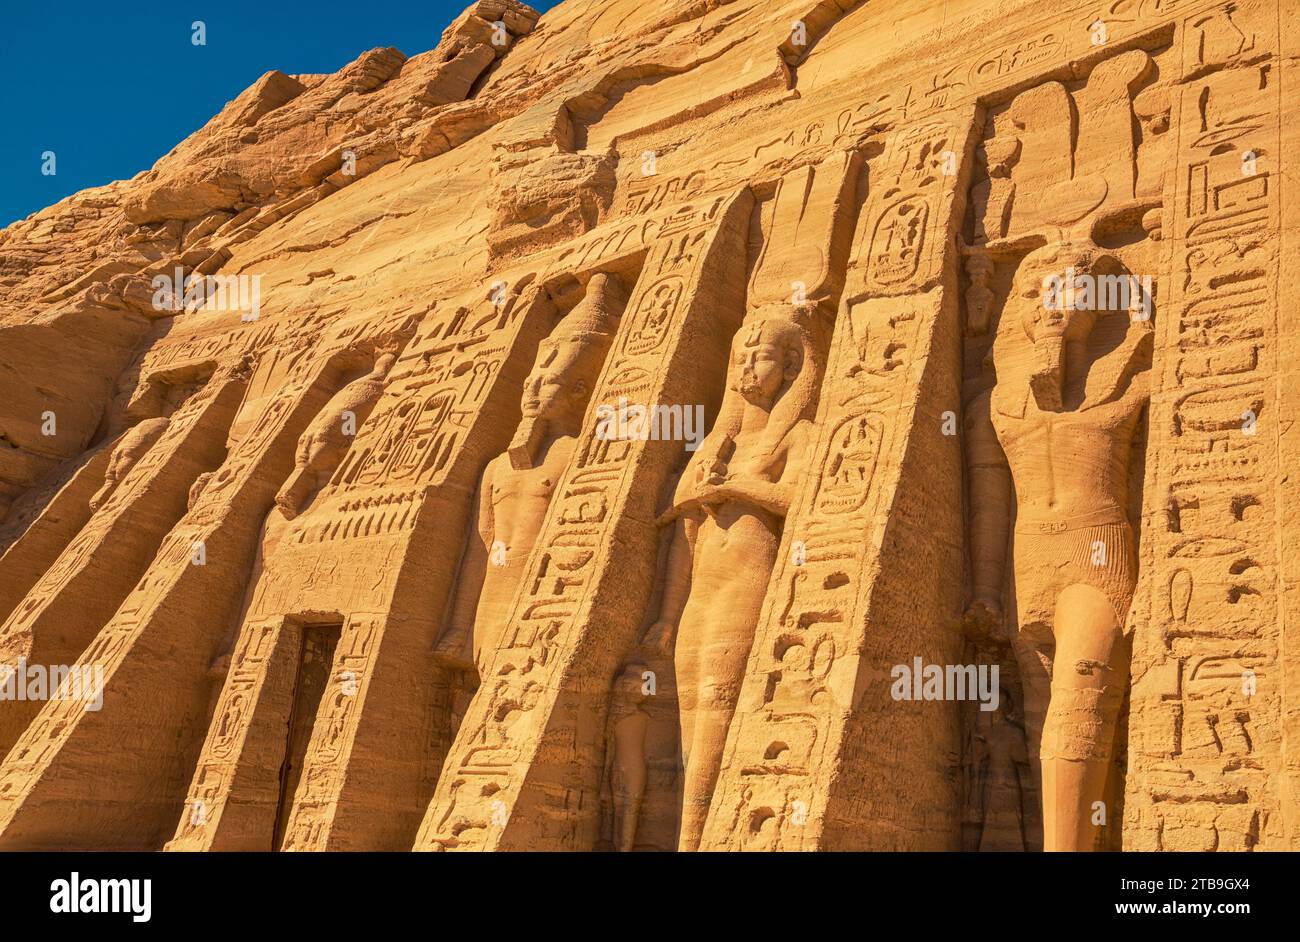 The six standing colossal statues honoring Hathor the Goddess of Music and Love and Ramses II's wife, Nefertari in front of the Temple of Hathor at... Stock Photo